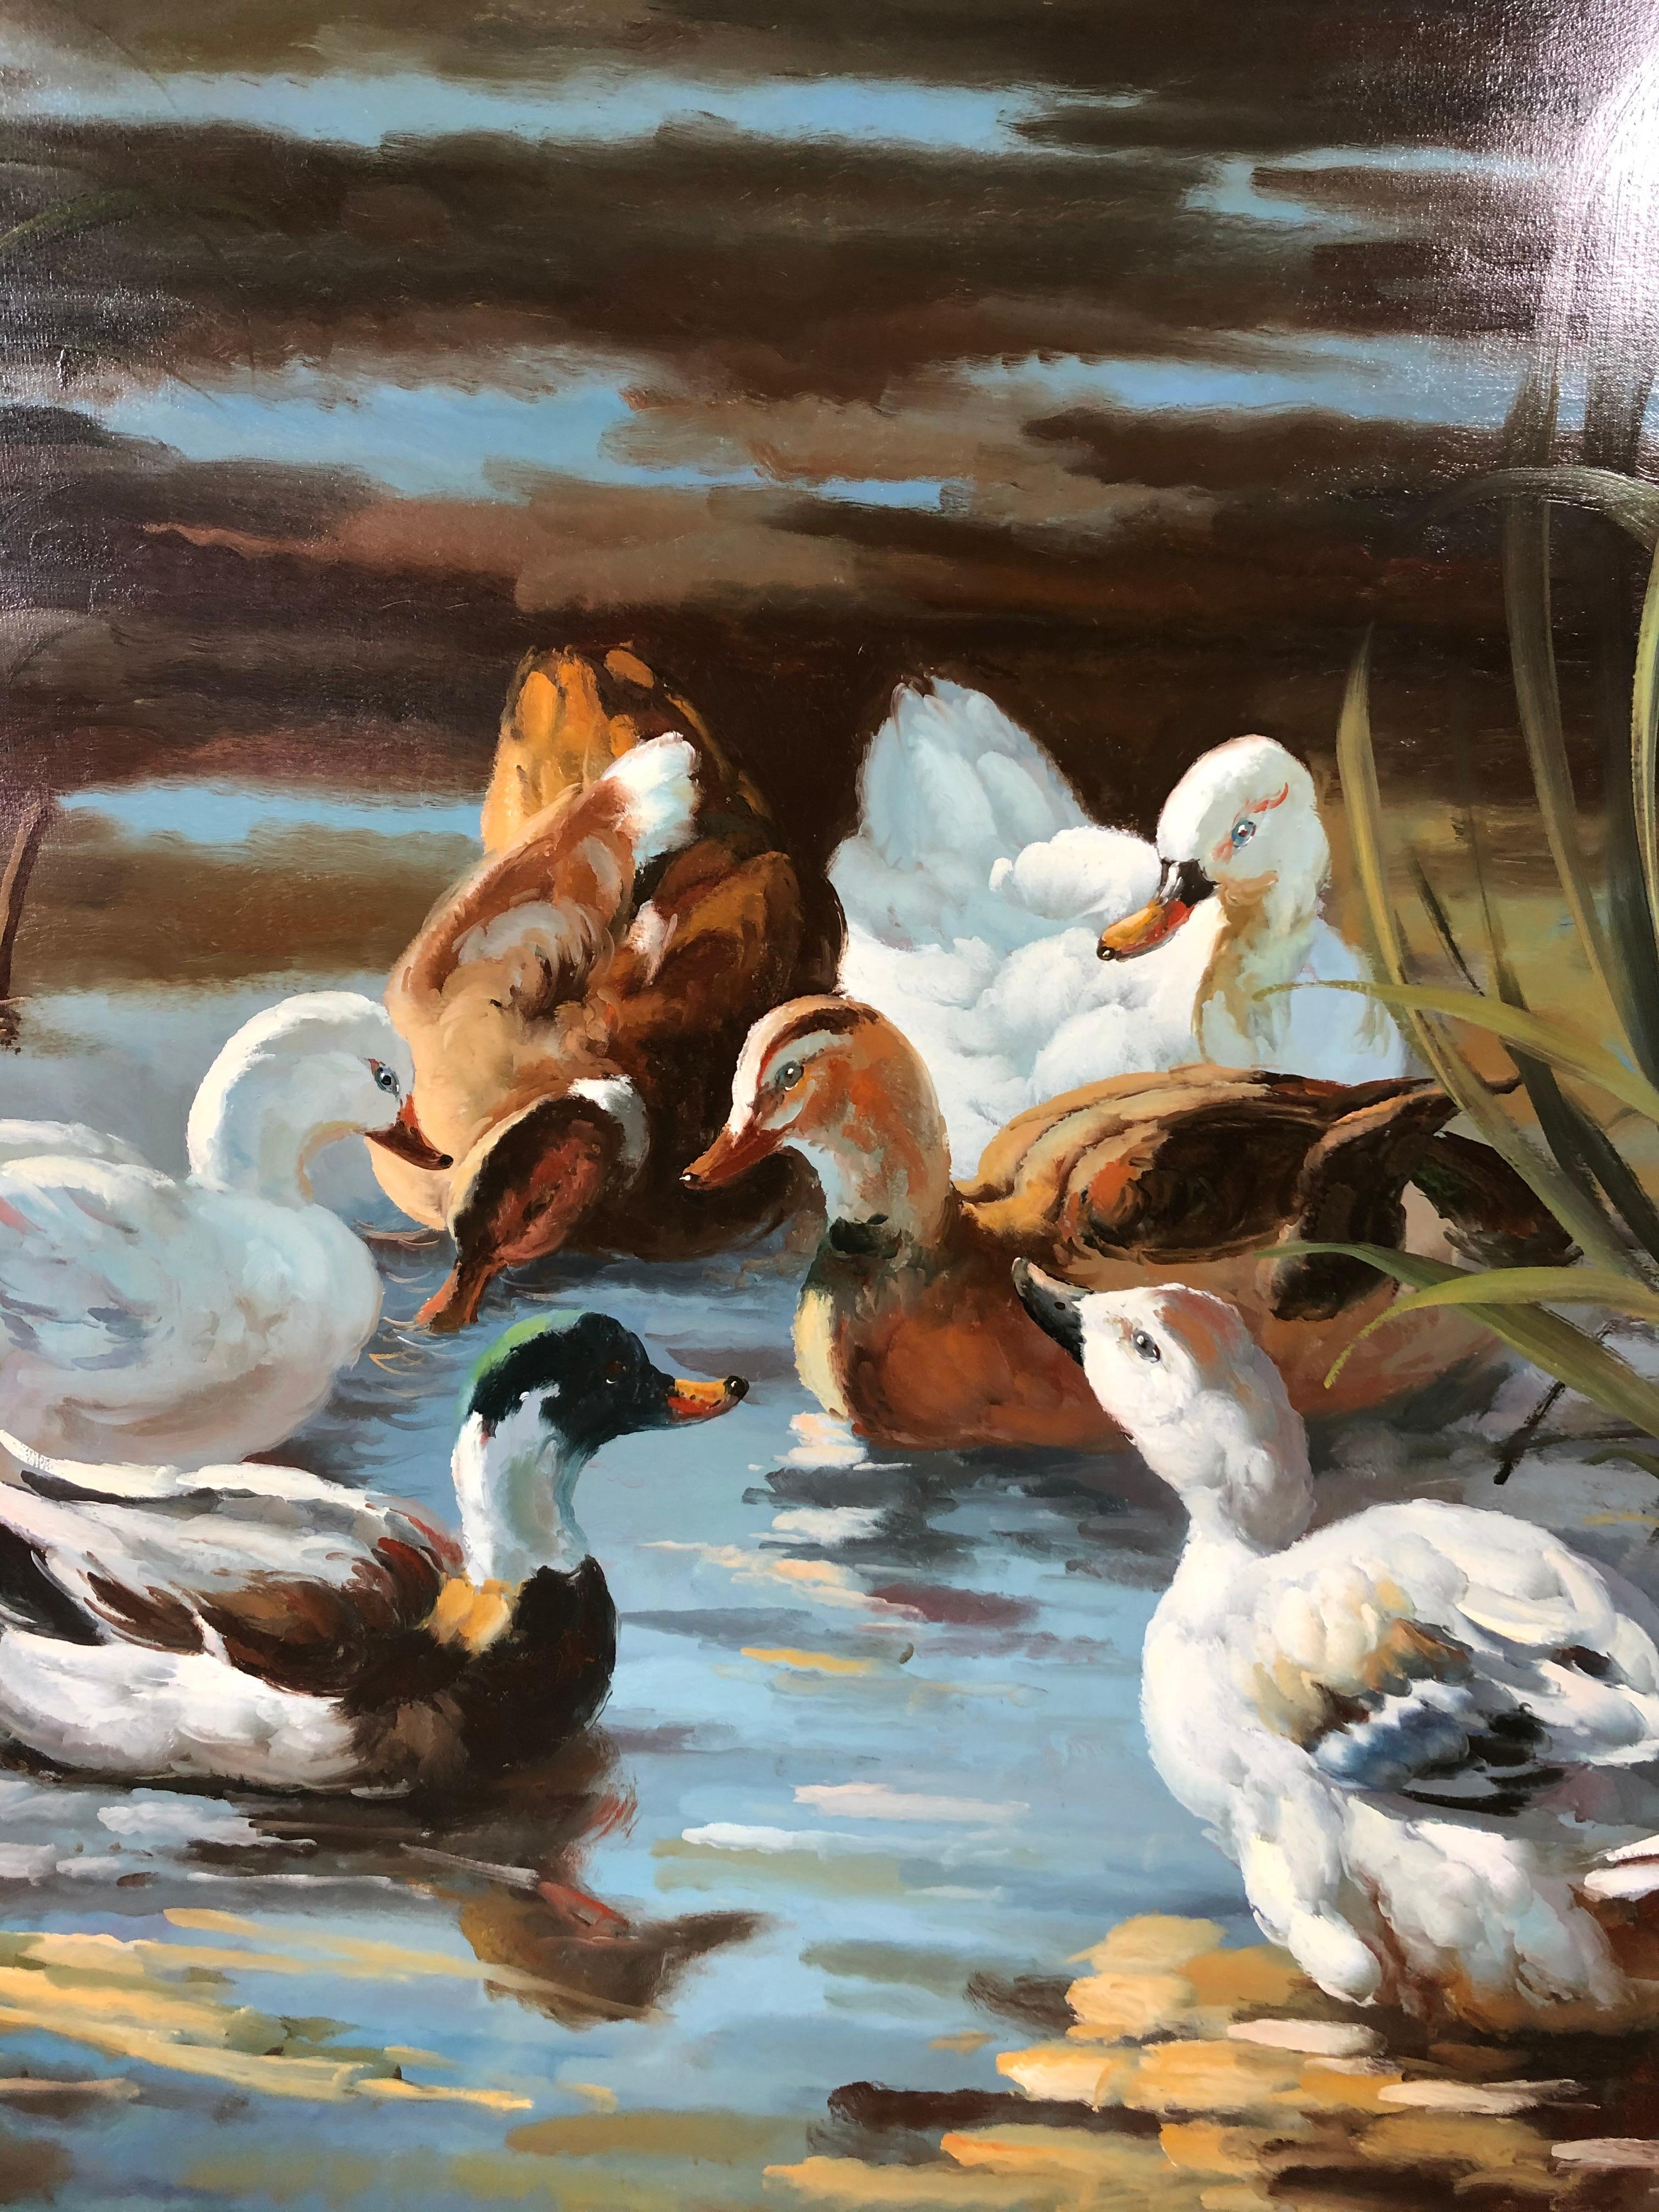 A strikingly large original oil on canvas signed Monte depicting a group of peaceful ducks among sea grass and calm water. Canvas is 48W x 40H
Carved wooden frame and painted liner.